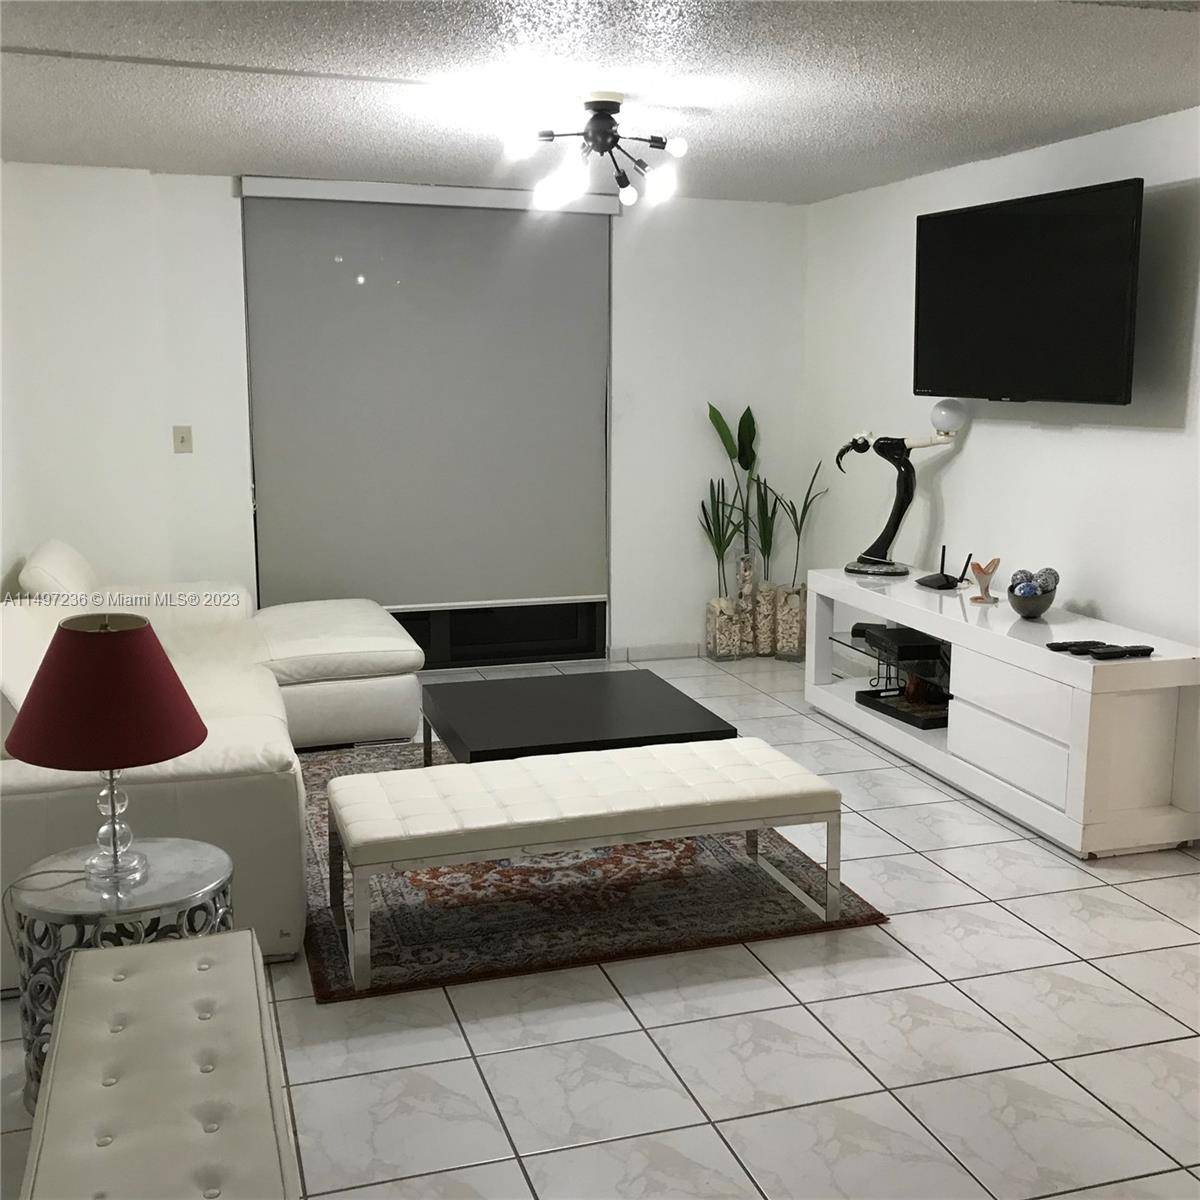 Nice 2 bedrooms and 2 full bathrooms in SoBe.